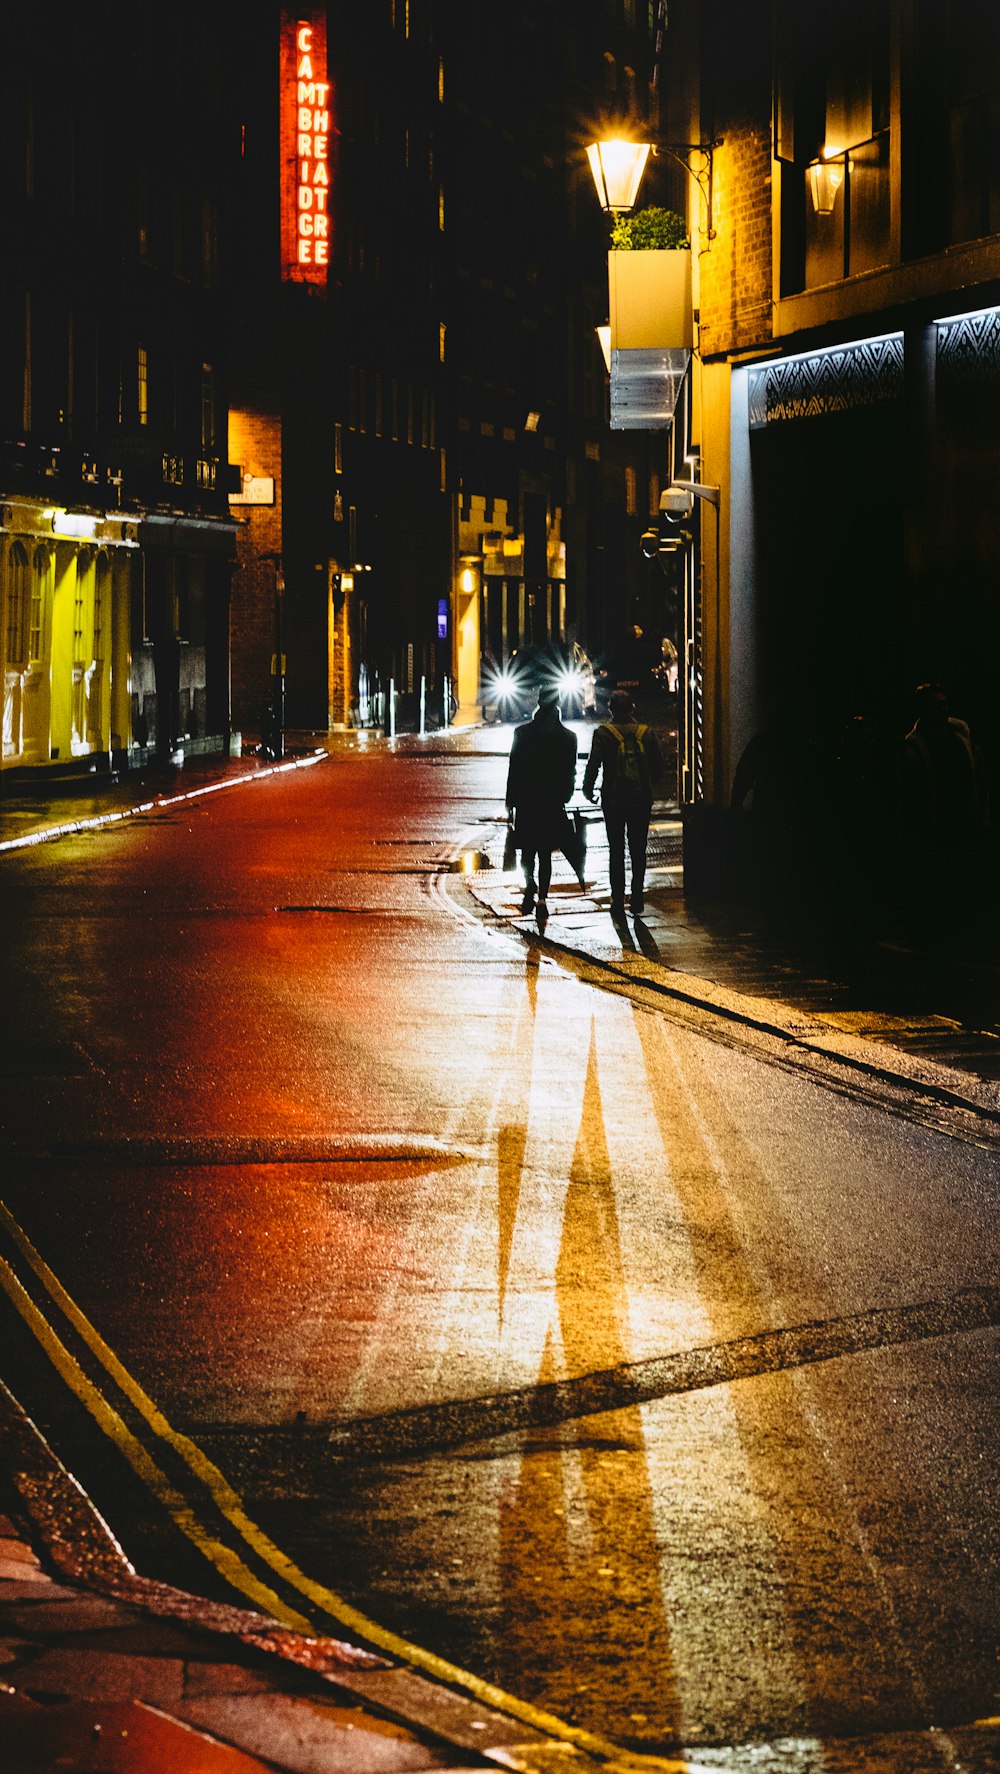 two people walking on street beside building during night time